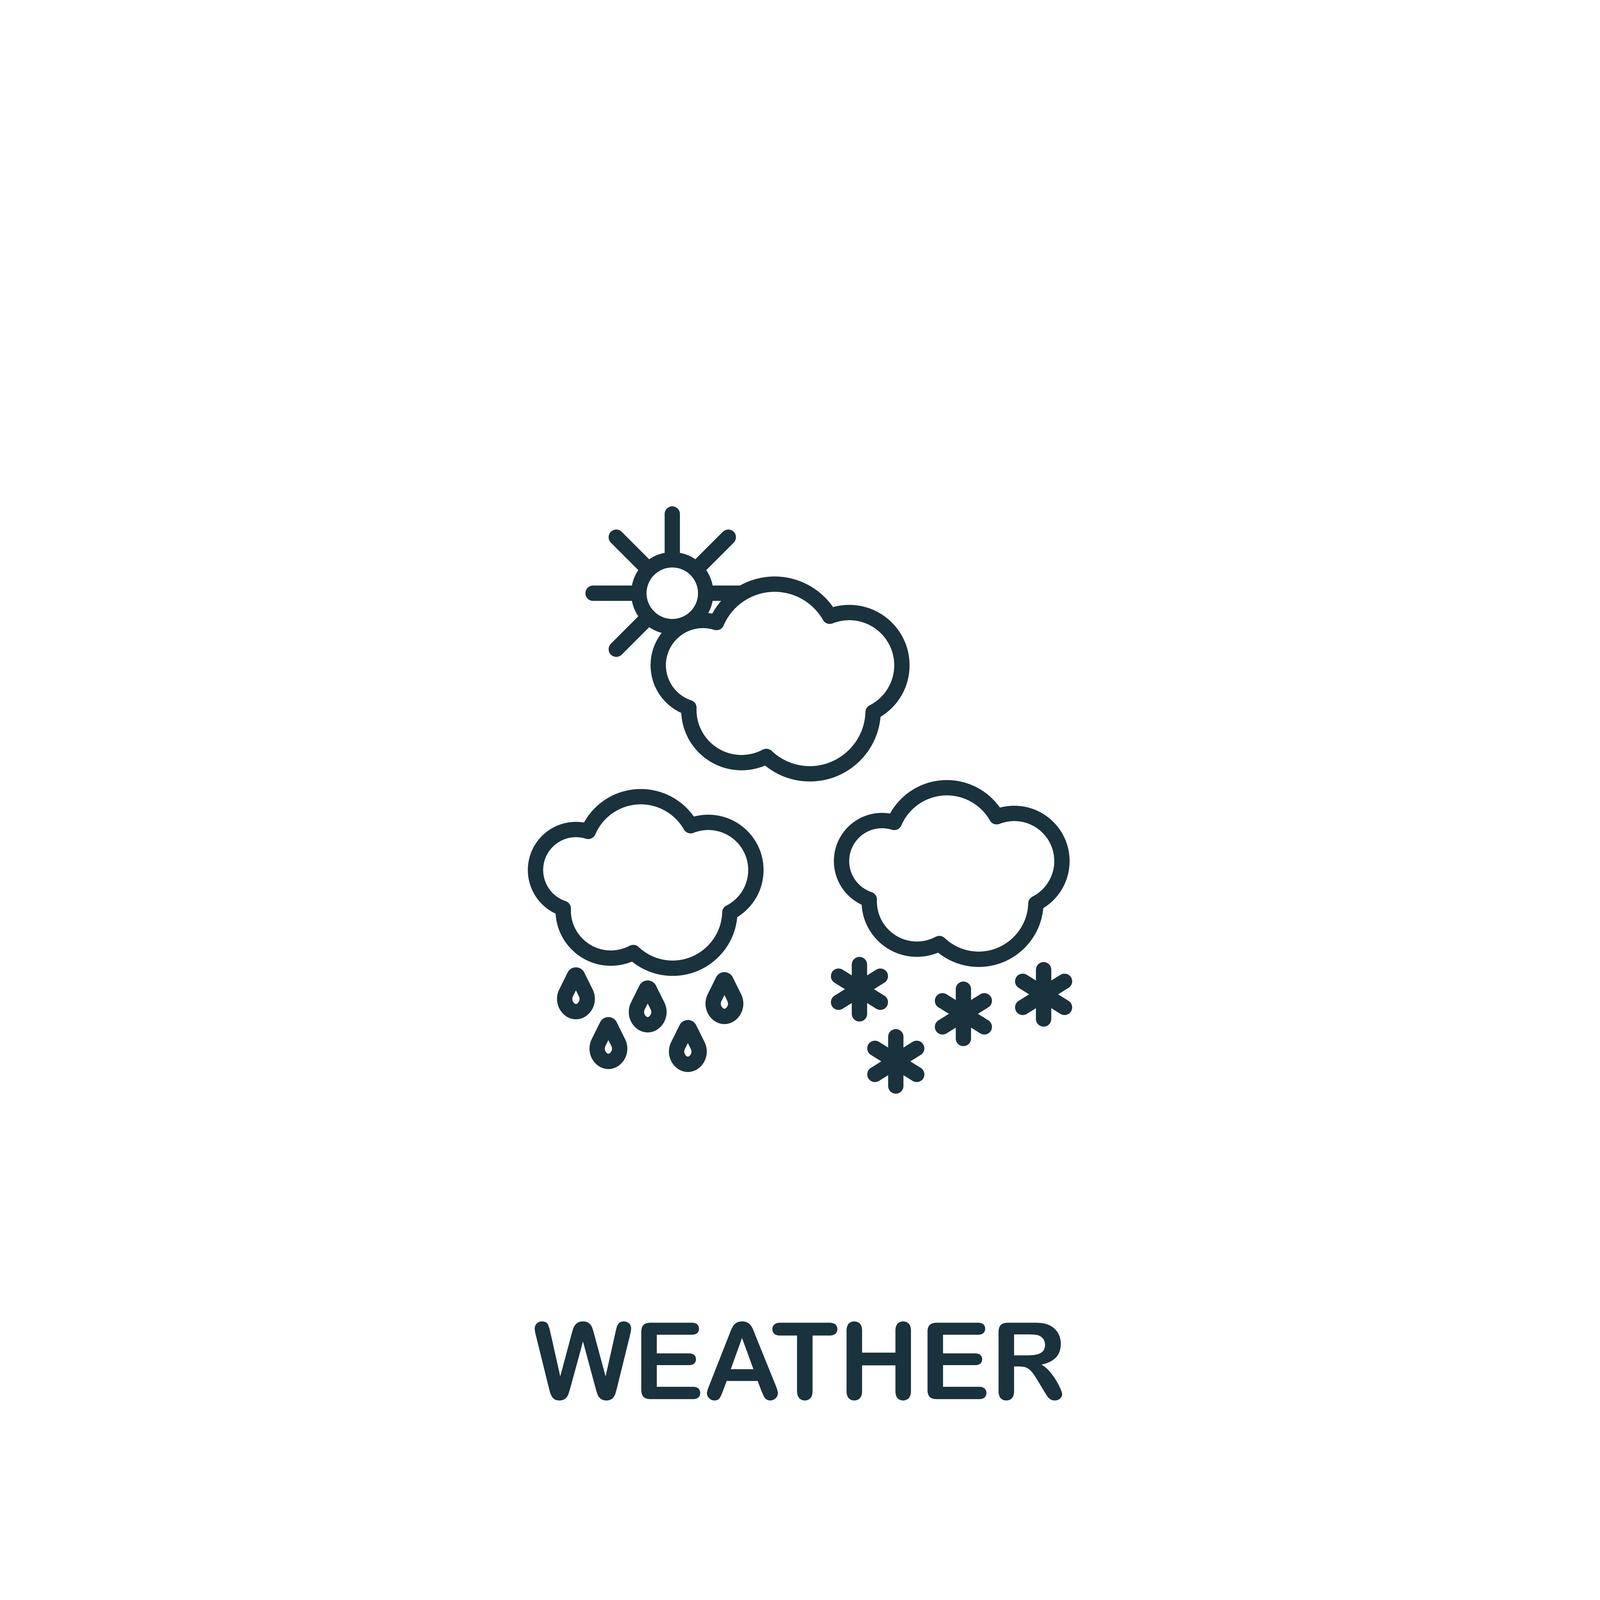 Weather icon. Monochrome simple icon for templates, web design and infographics by simakovavector